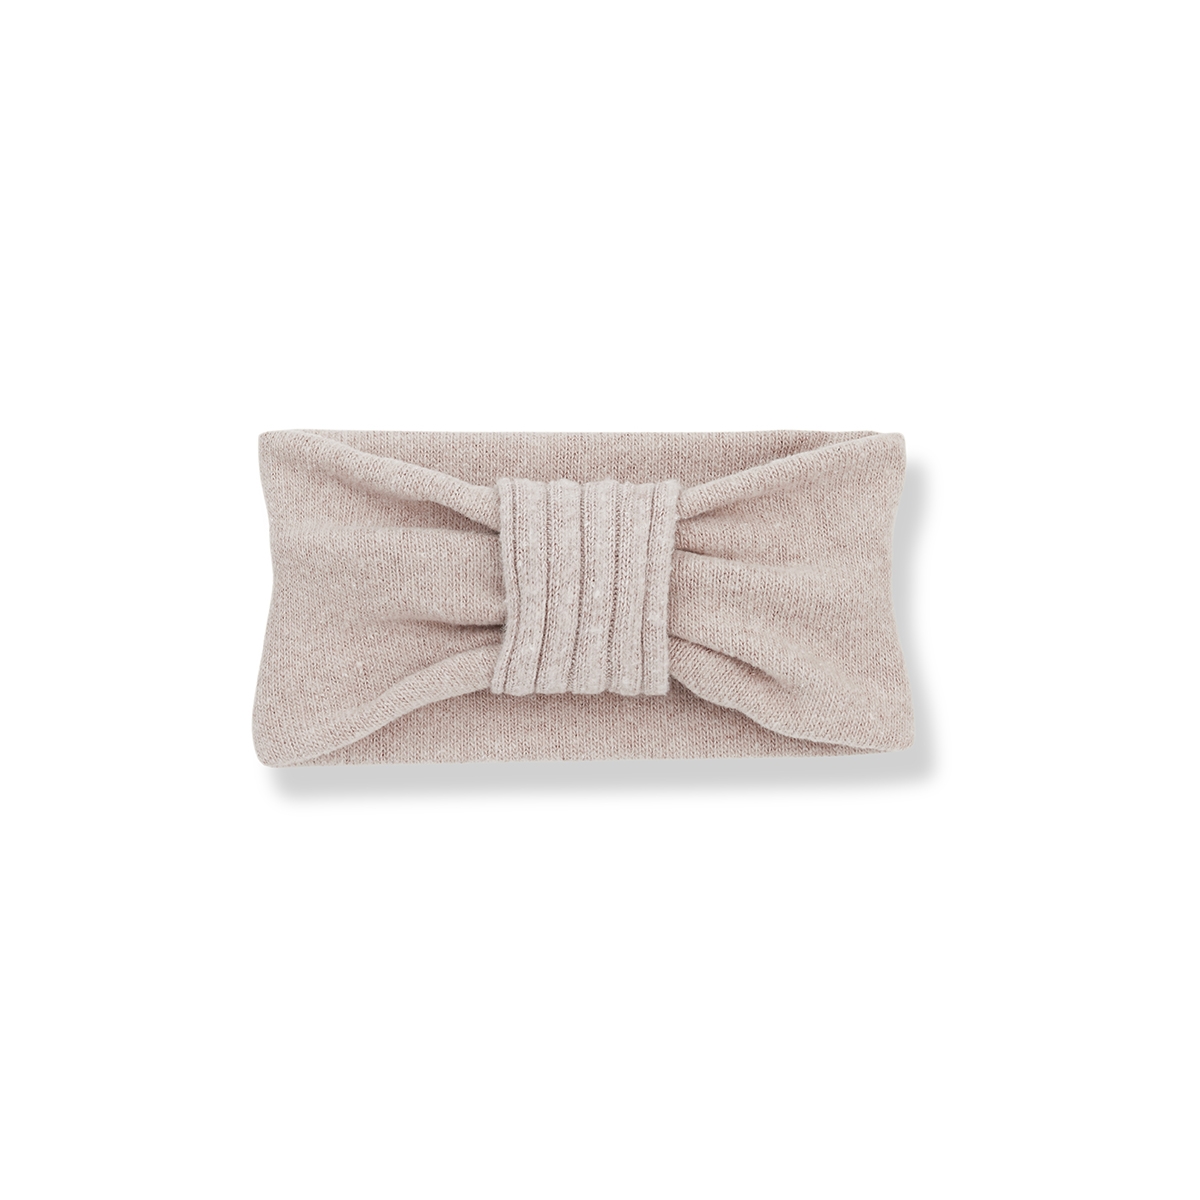 1 + in the family Abril hair band pink AW21-ABRIL-NUDE 